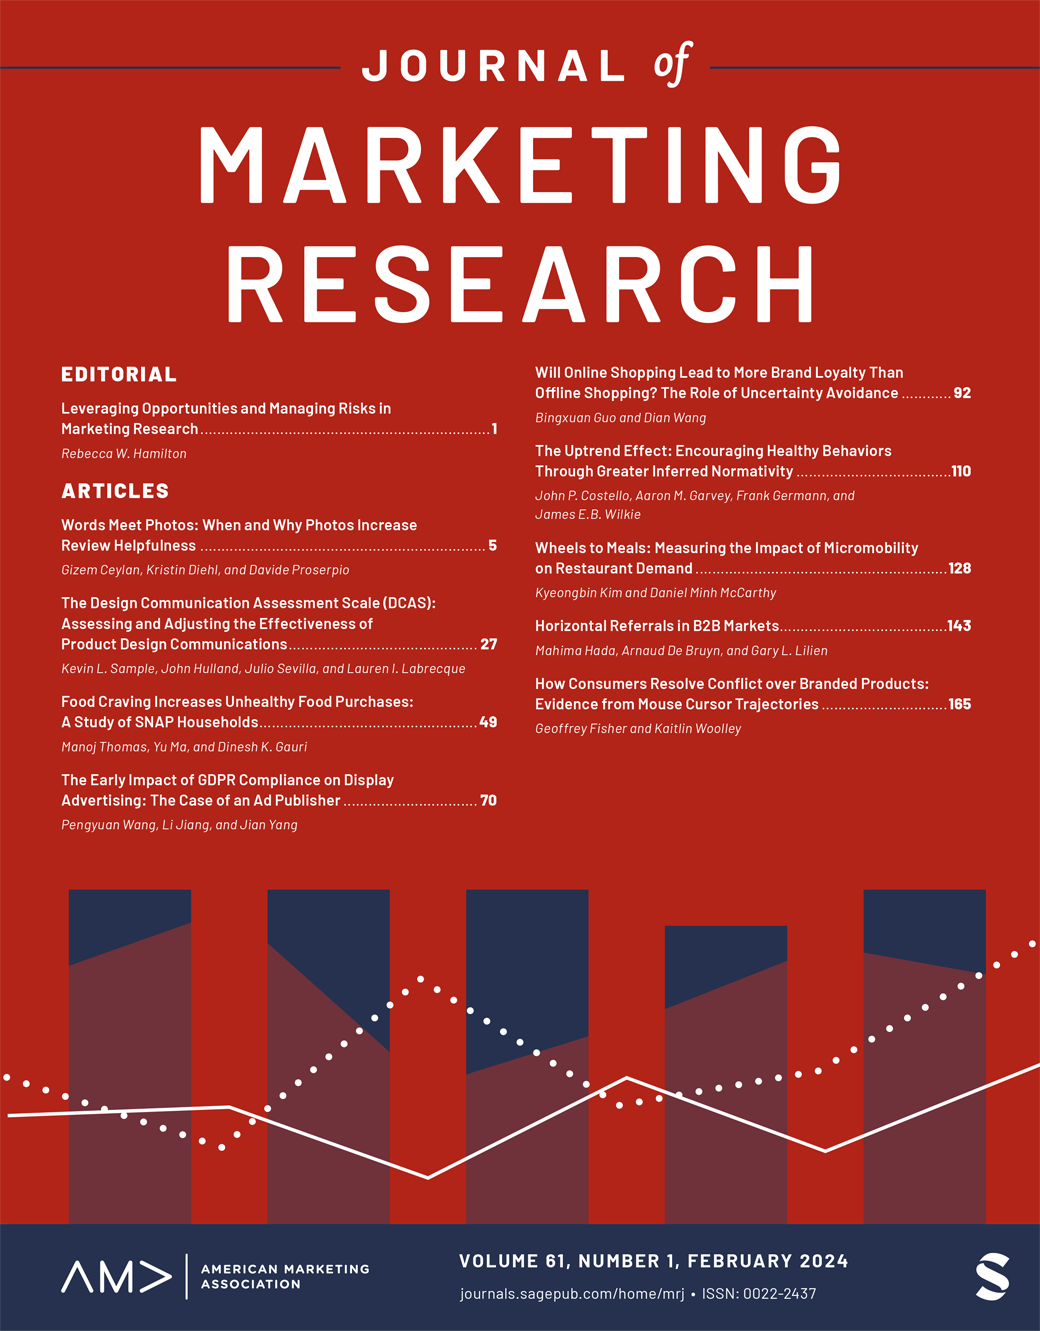 Journal of Marketing Research